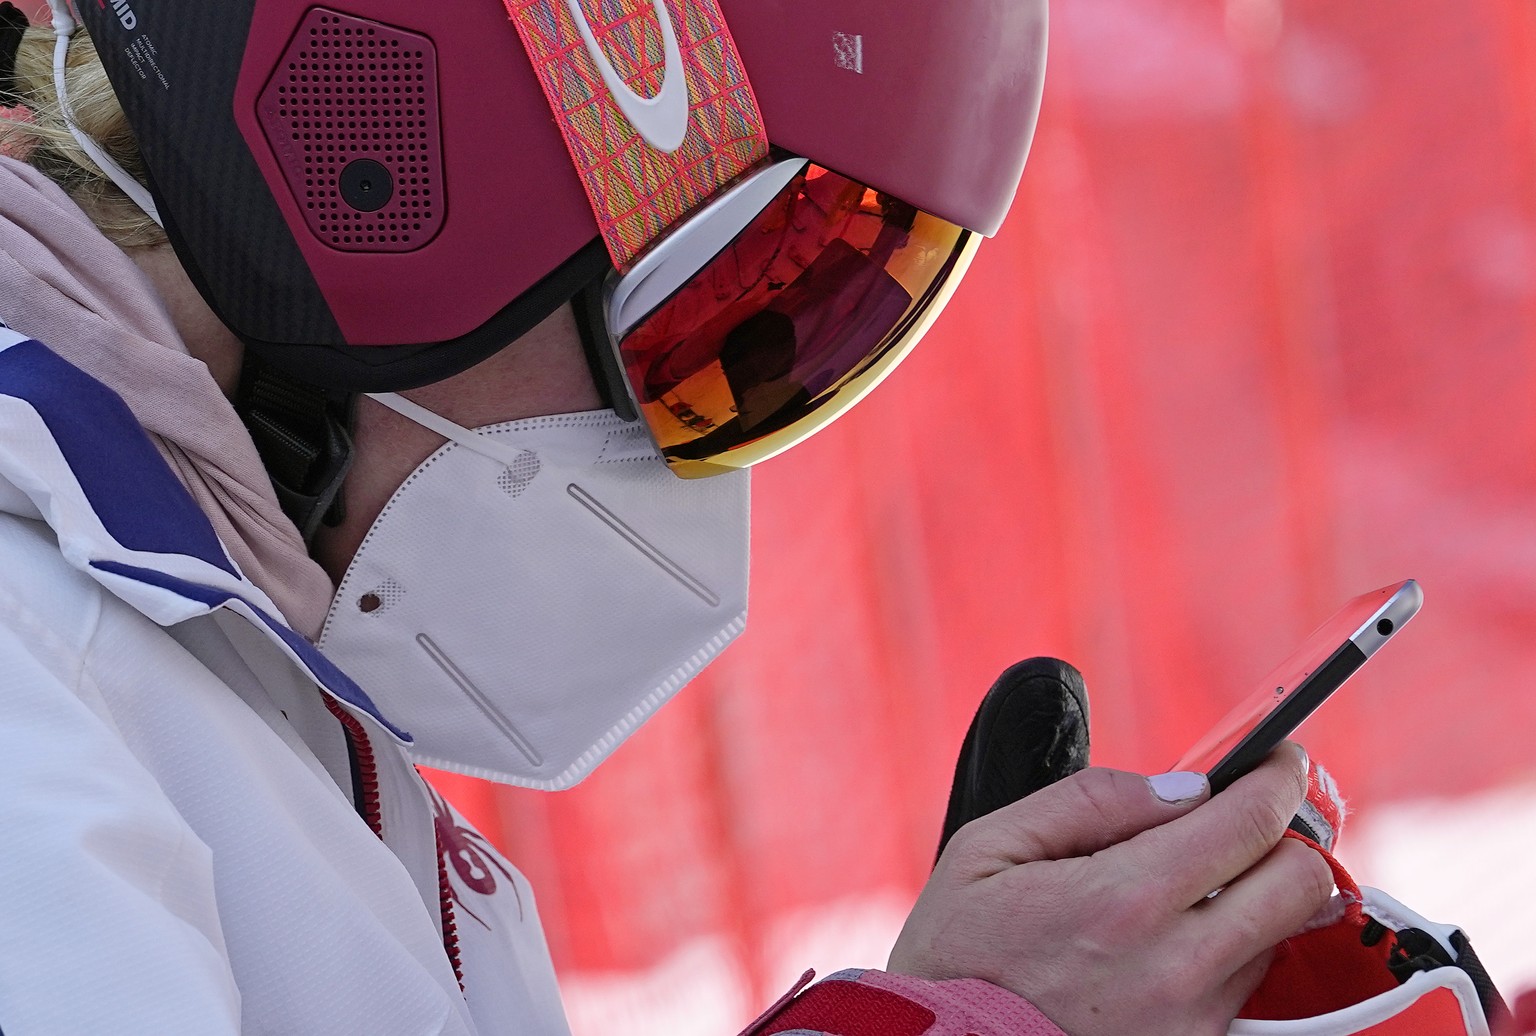 Mikaela Shiffrin of the United States looks at a tablet before heading to the gondola to go up the alpine ski course for a training run at the 2022 Winter Olympics, Thursday, Feb. 10, 2022, in the Yan ...